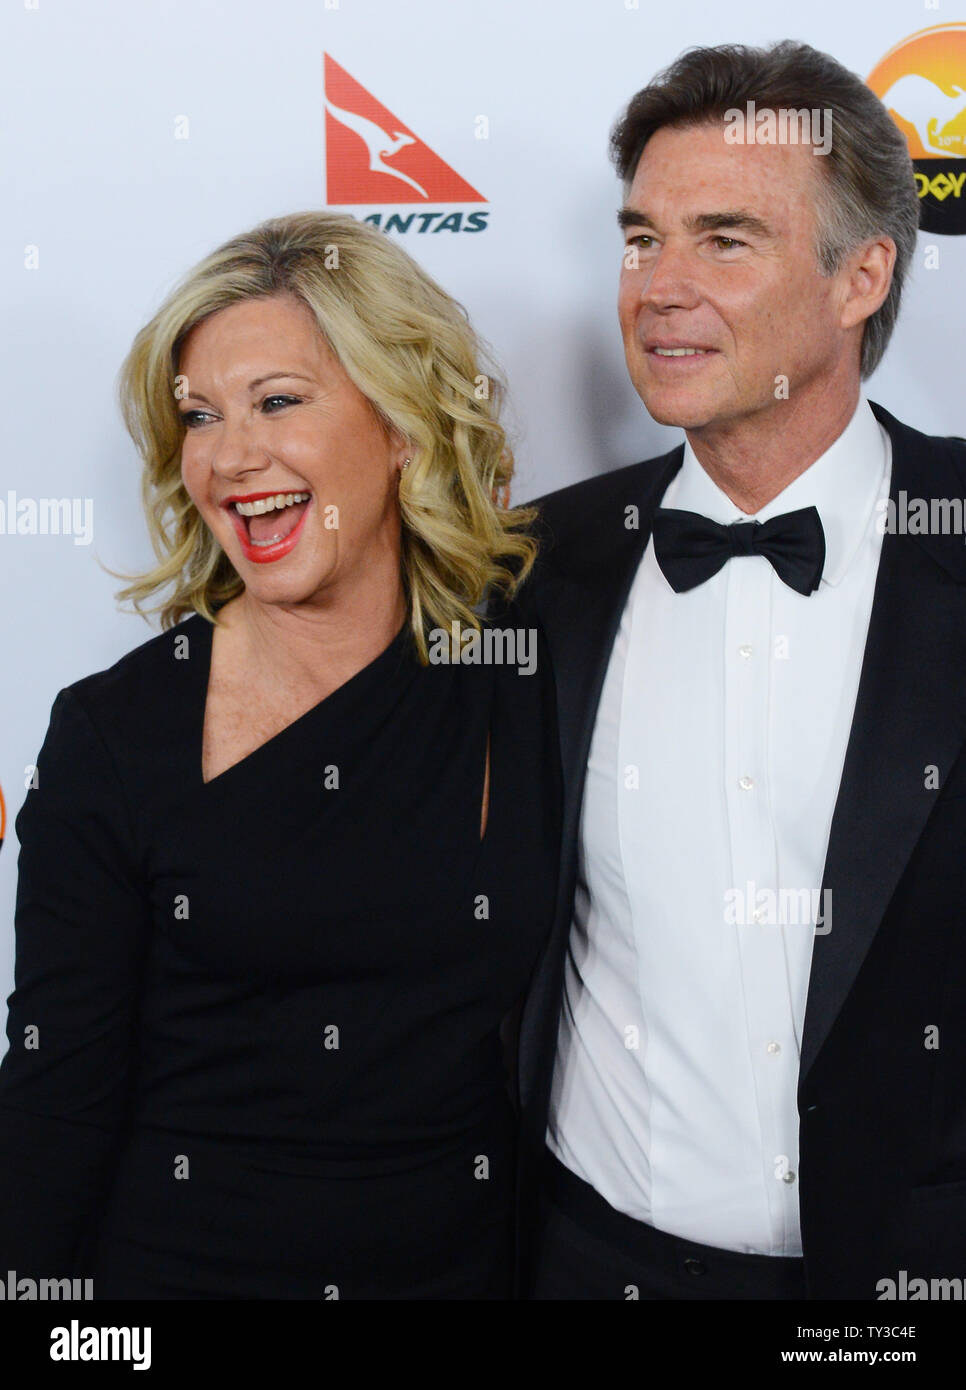 Actress Olivia Newton-John and her husband John Easterling attend the G'Day USA Los Angeles gala at JW Marriott in Los Angeles on January 12, 2013.  UPI/Jim Ruymen Stock Photo